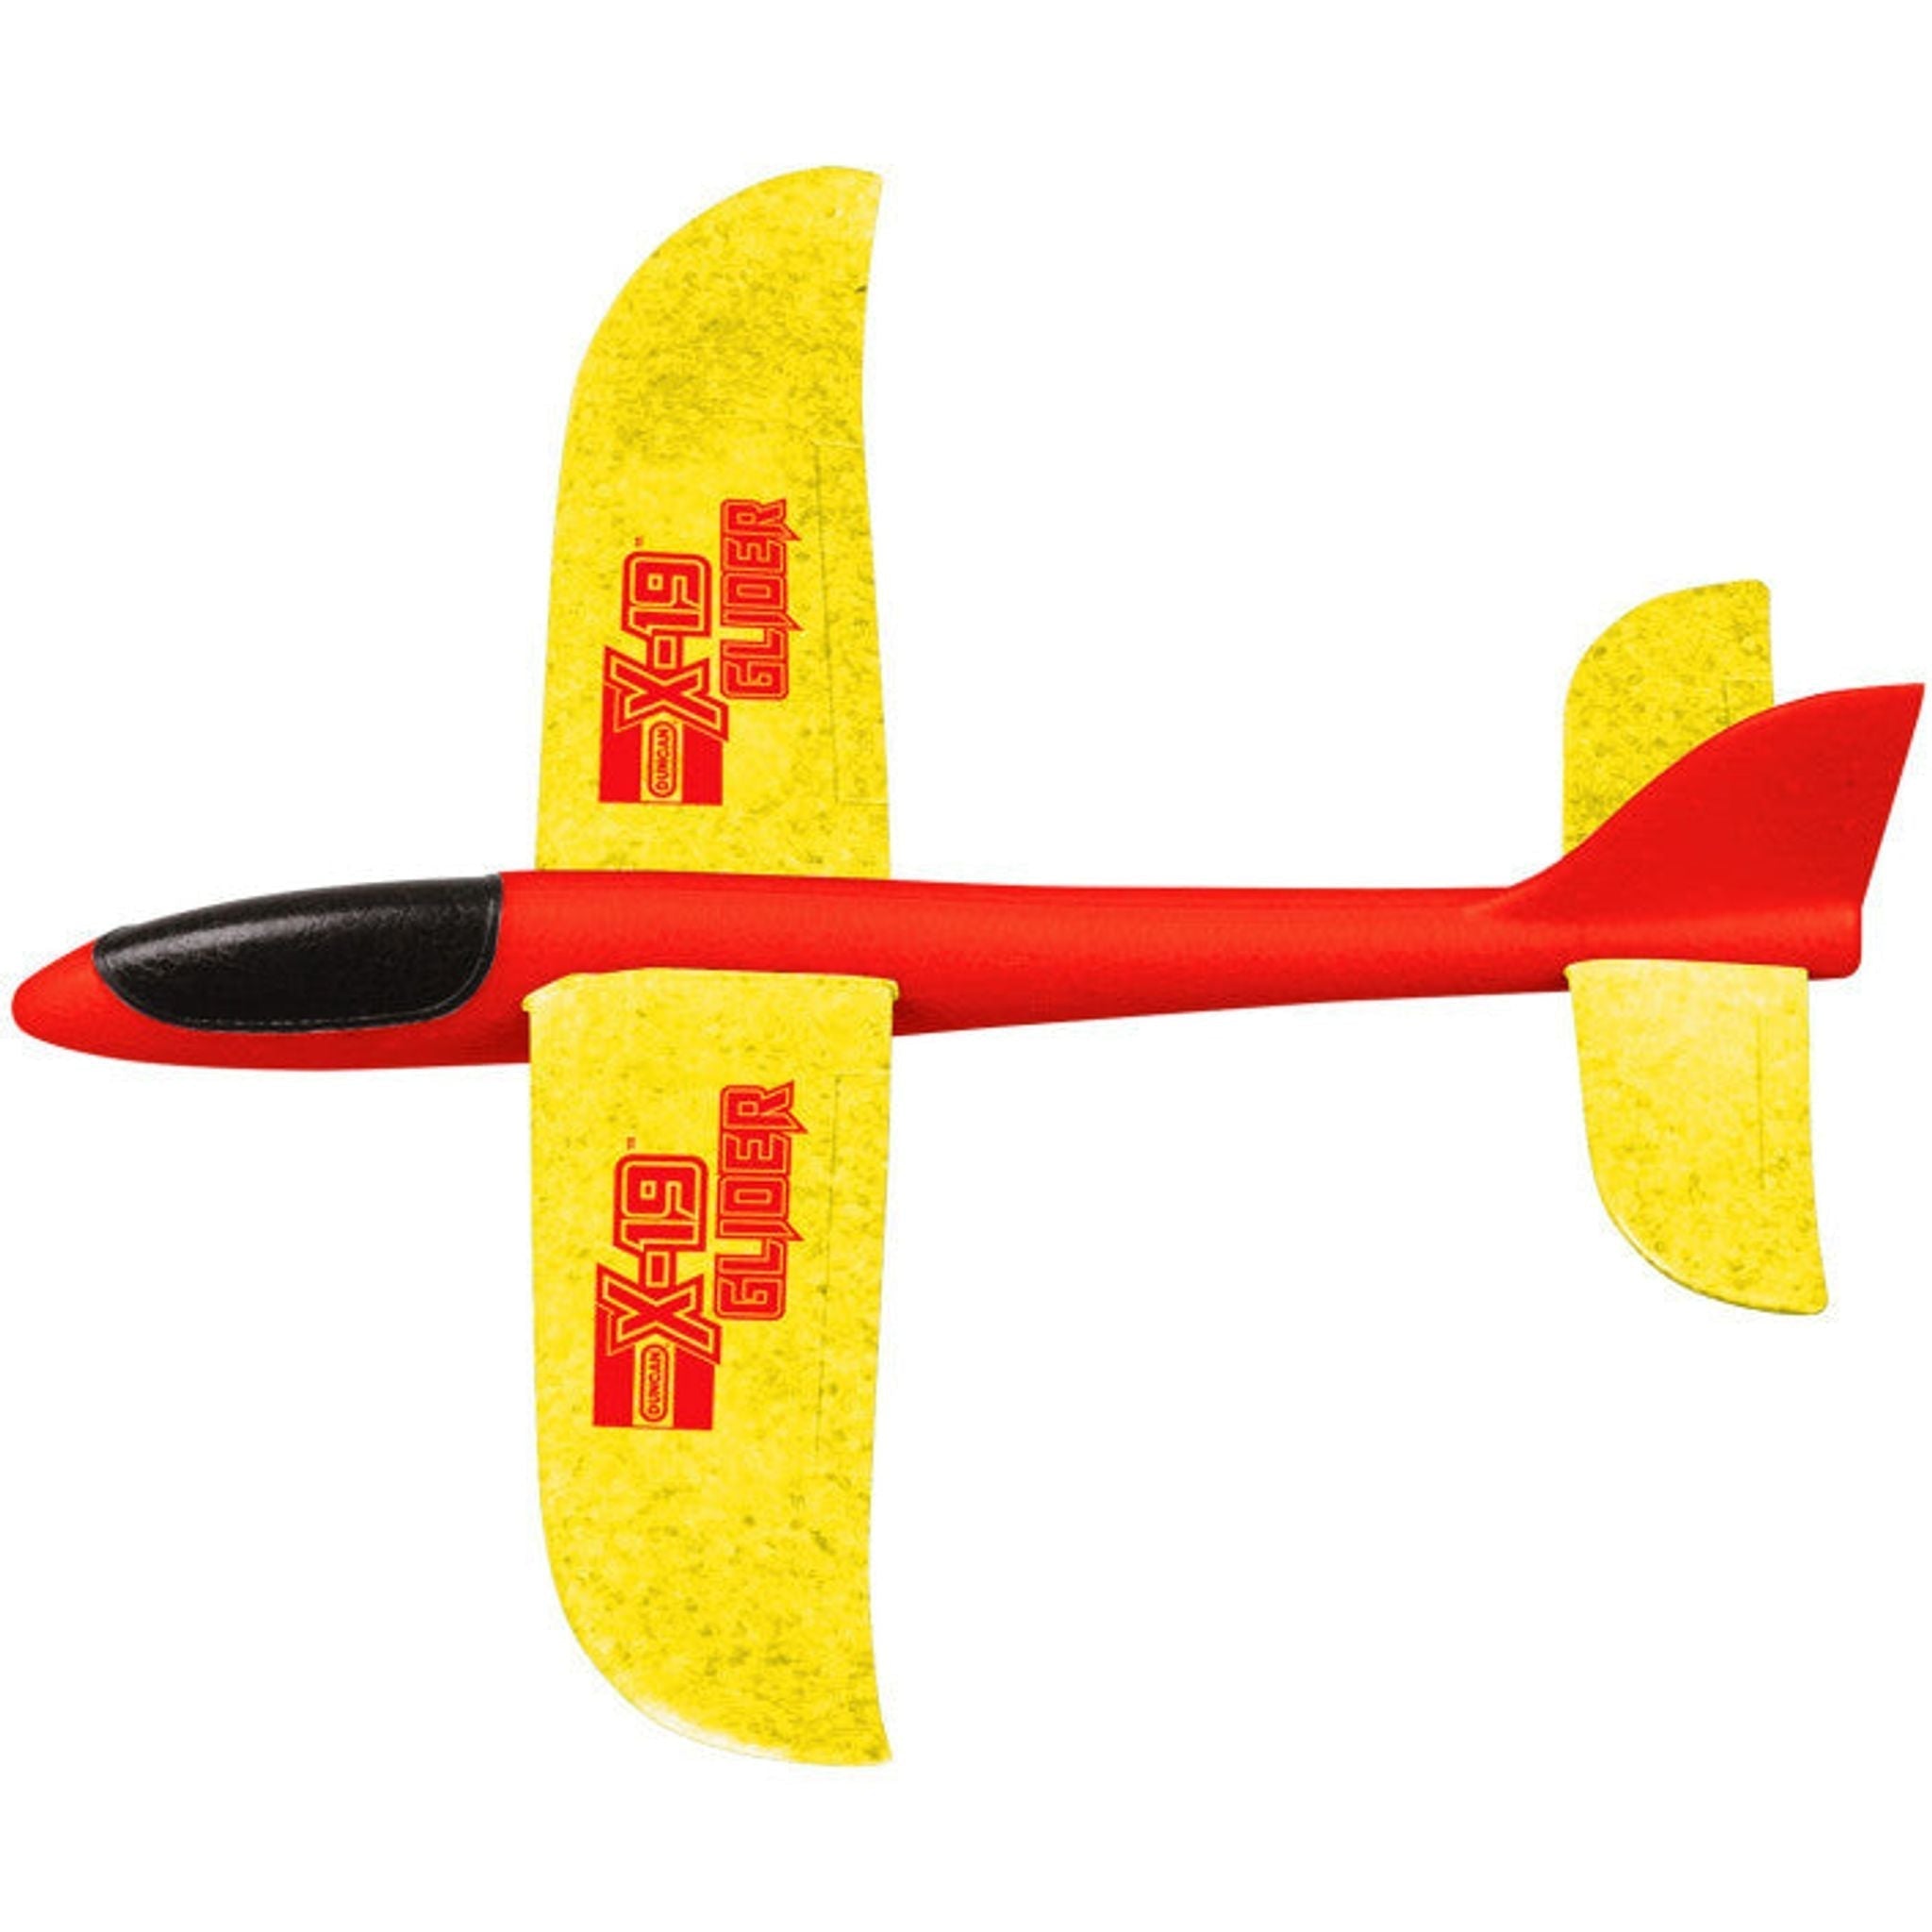 Duncan X-19 Glider with Hand Launcher - Toybox Tales